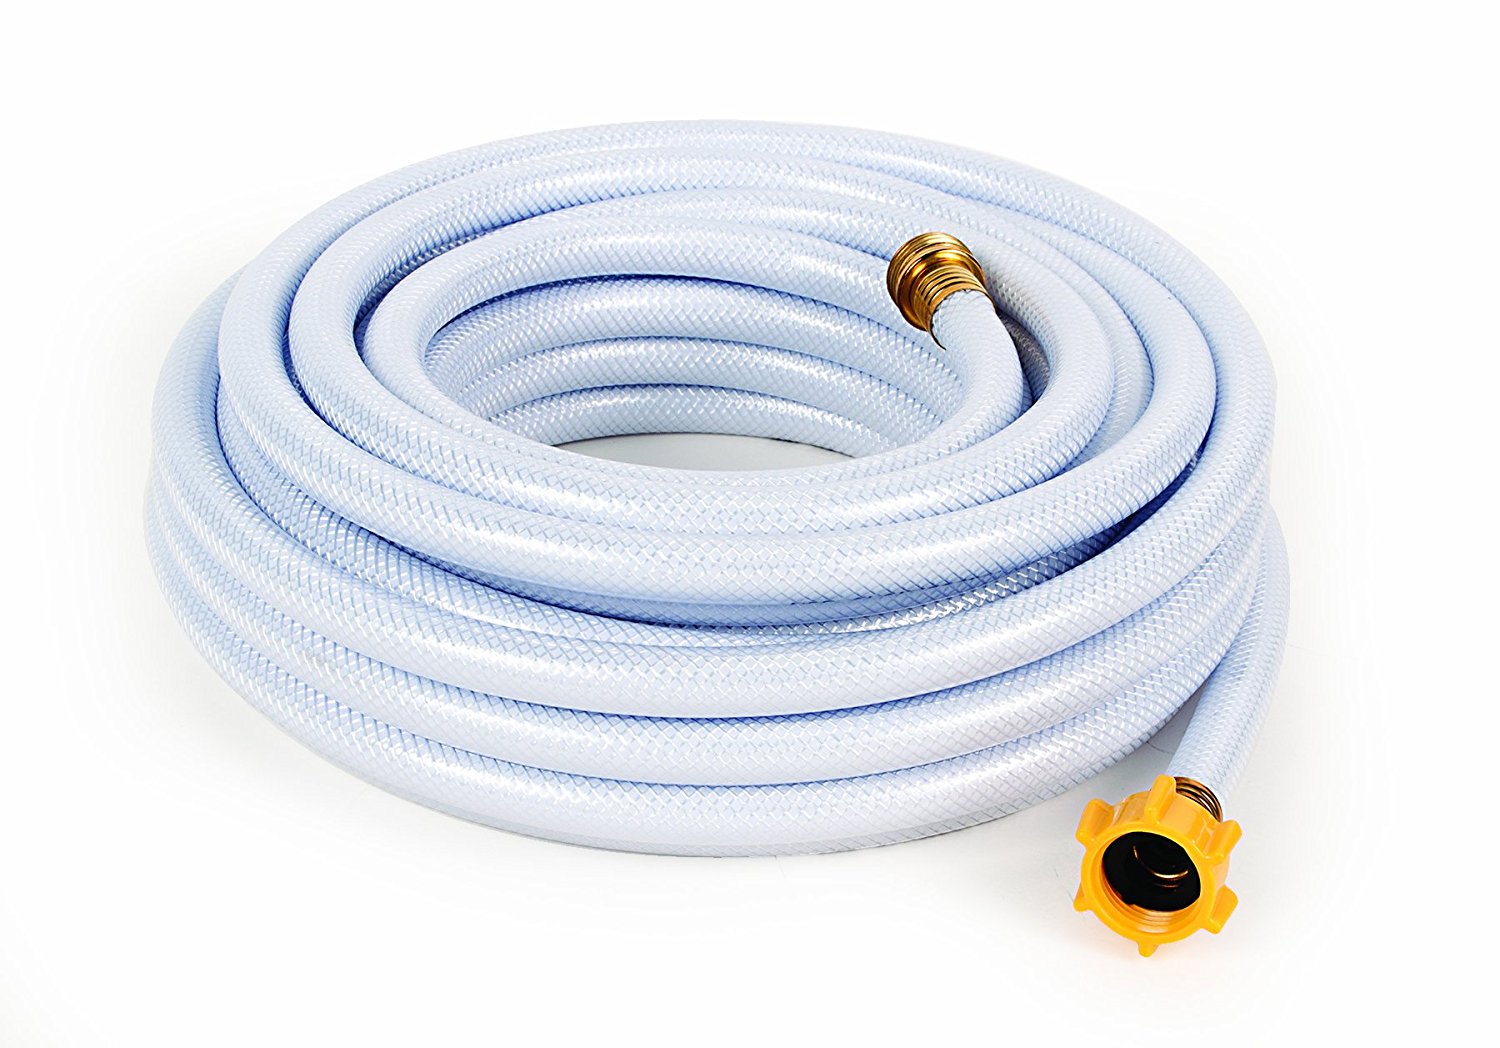 Camco 50ft TastePURE Drinking Water Hose - Lead and BPA Free, Reinforced for Maximum Kink Resistance 1/2"Inner Diameter (22753)